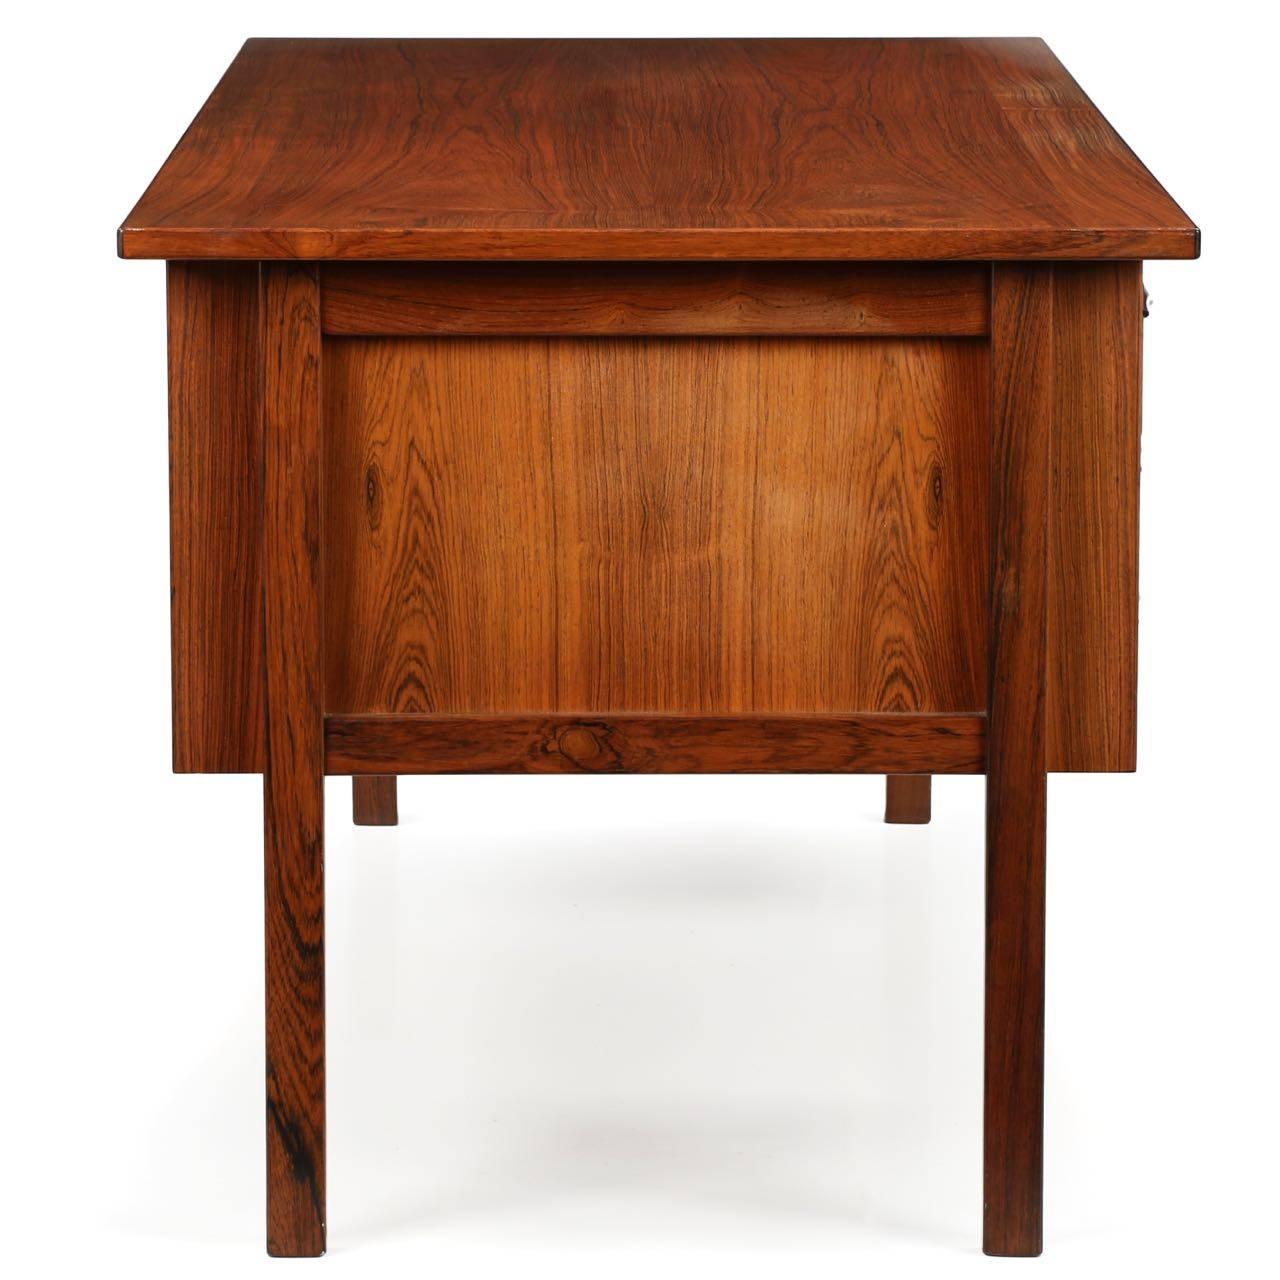 20th Century Danish Mid-Century Modern Rosewood Executive Desk with Hidden Compartment